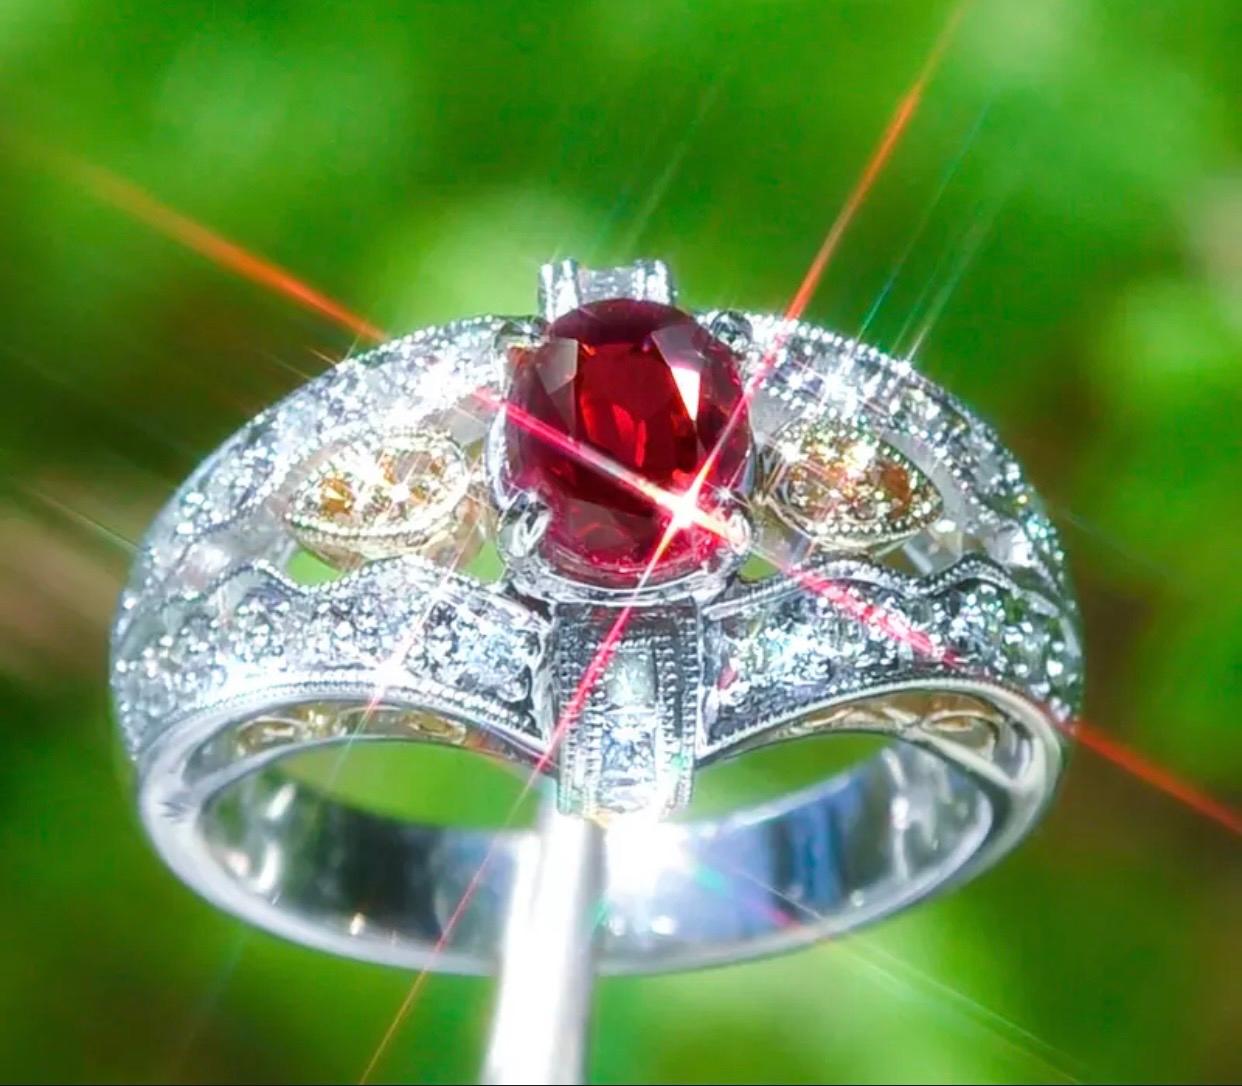 Certified & Appraised by
American International Gemological Laboratories

This Burma Ruby is Beyond Rare!
Ring Size: US 6.5 (Free sizing available)
Natural Ruby: 1.56ct
Cut: Oval   Type: Transparent
Color: Red (HIGHLY Sought After)  
Treatment: